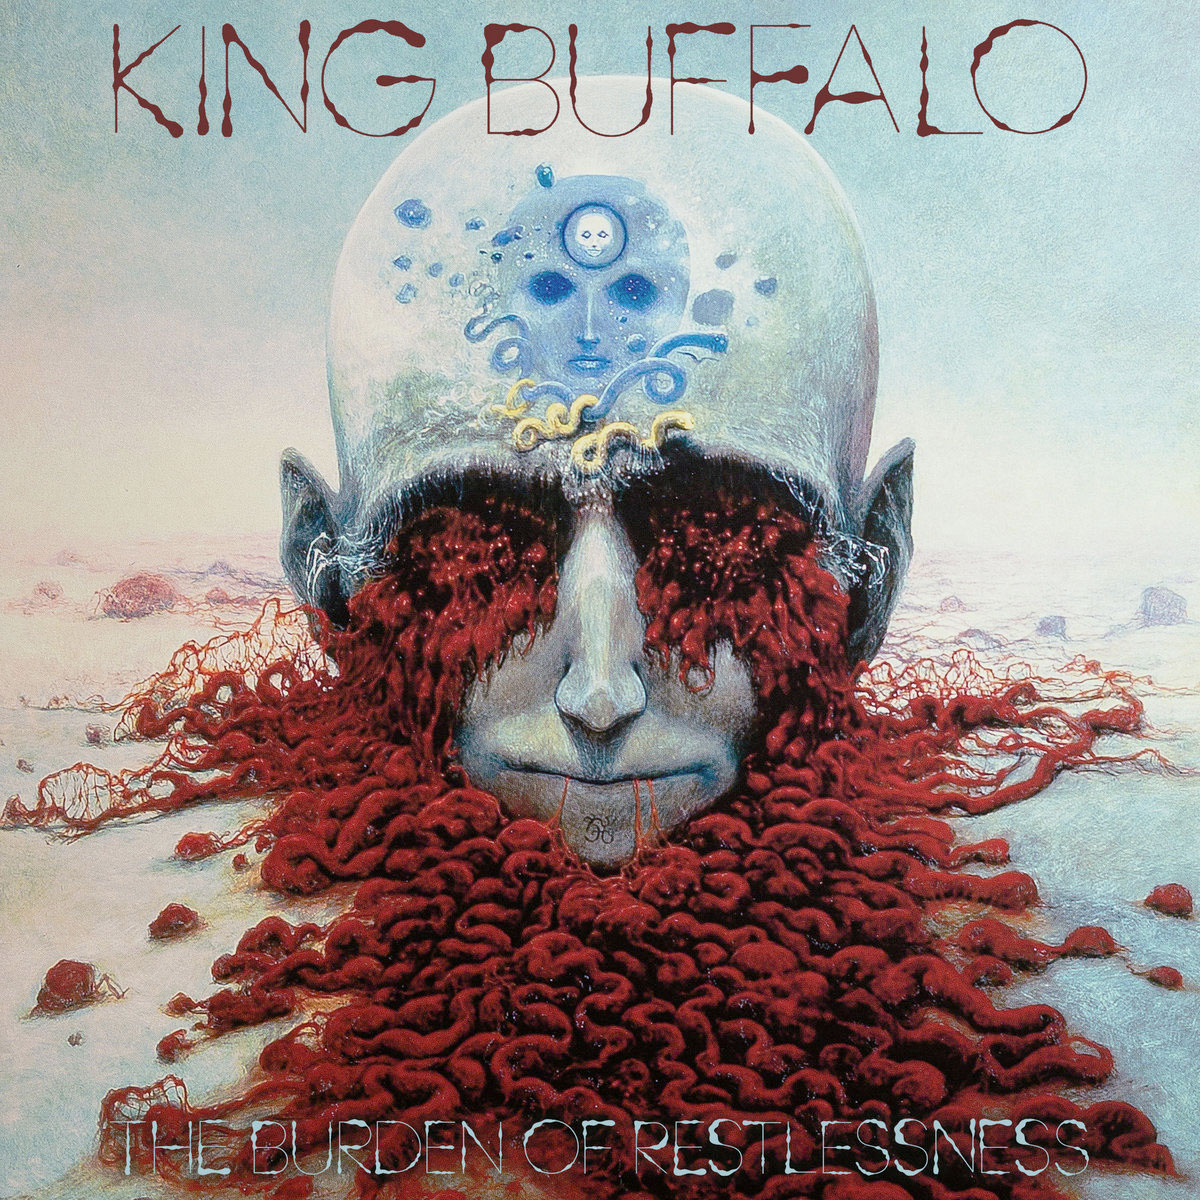 The Burden of Restlessness by King Buffalo